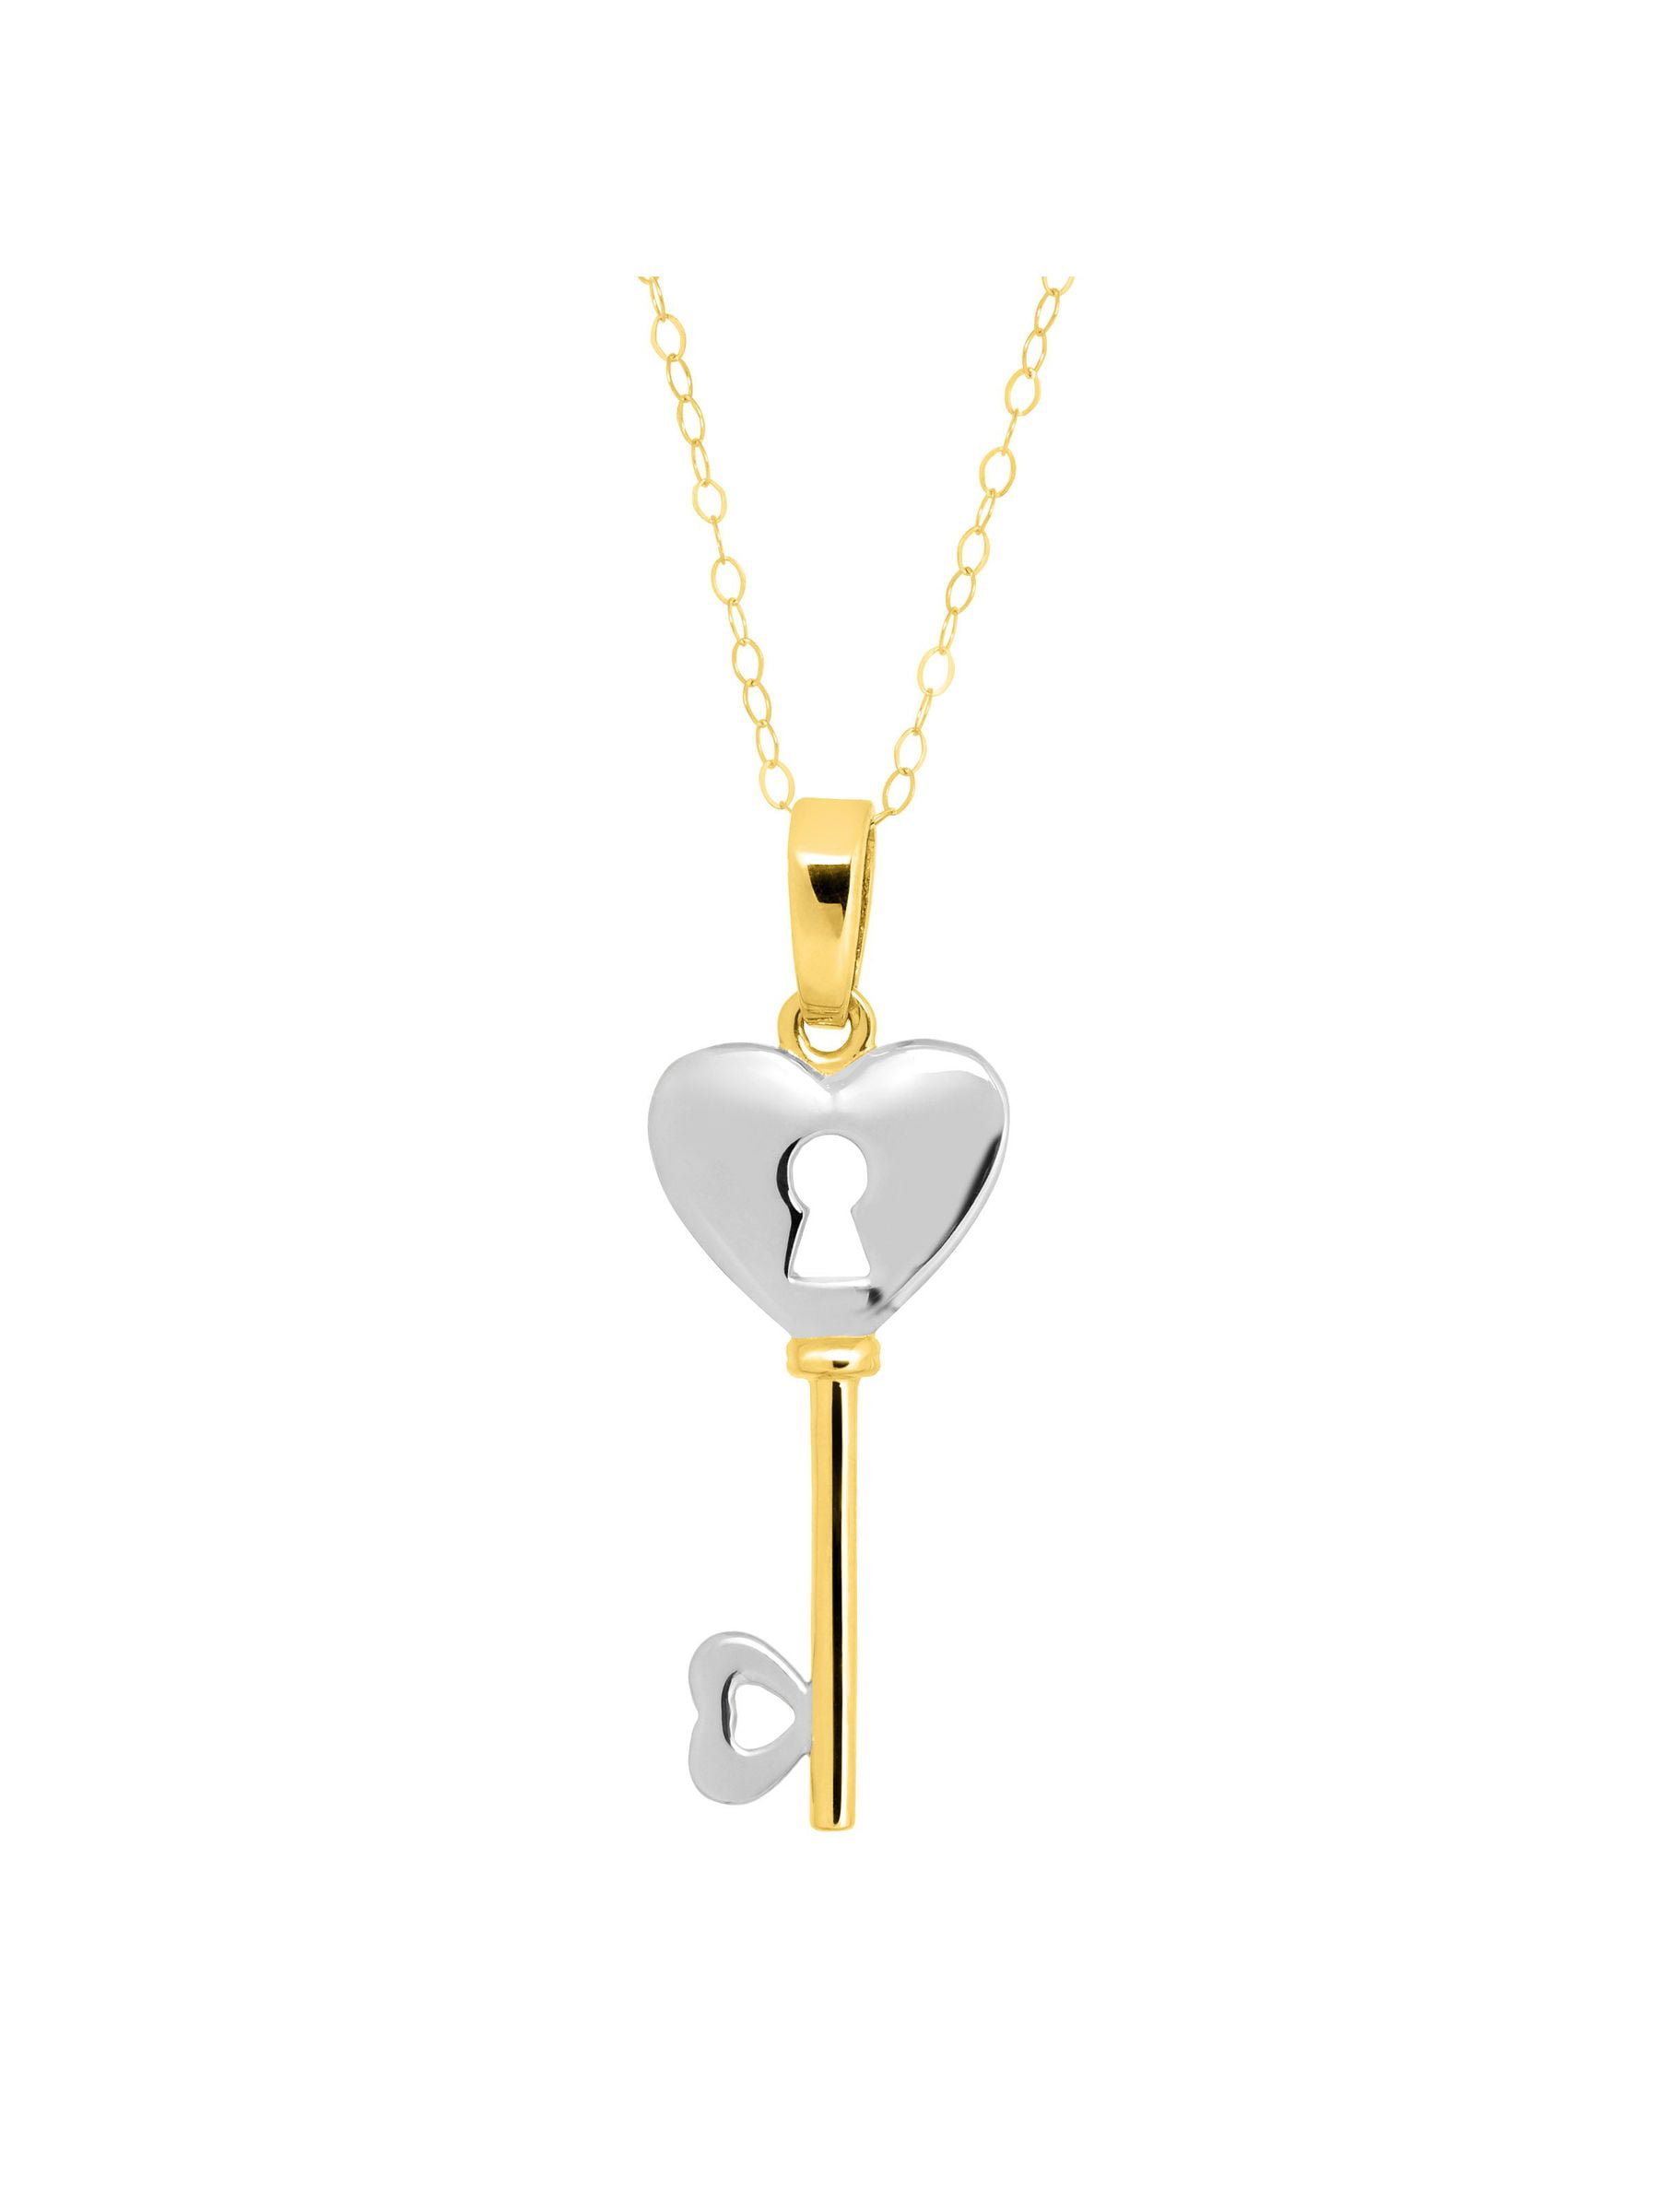 14k Yellow and White Gold Two Tone Heart Key Pendant Necklace 